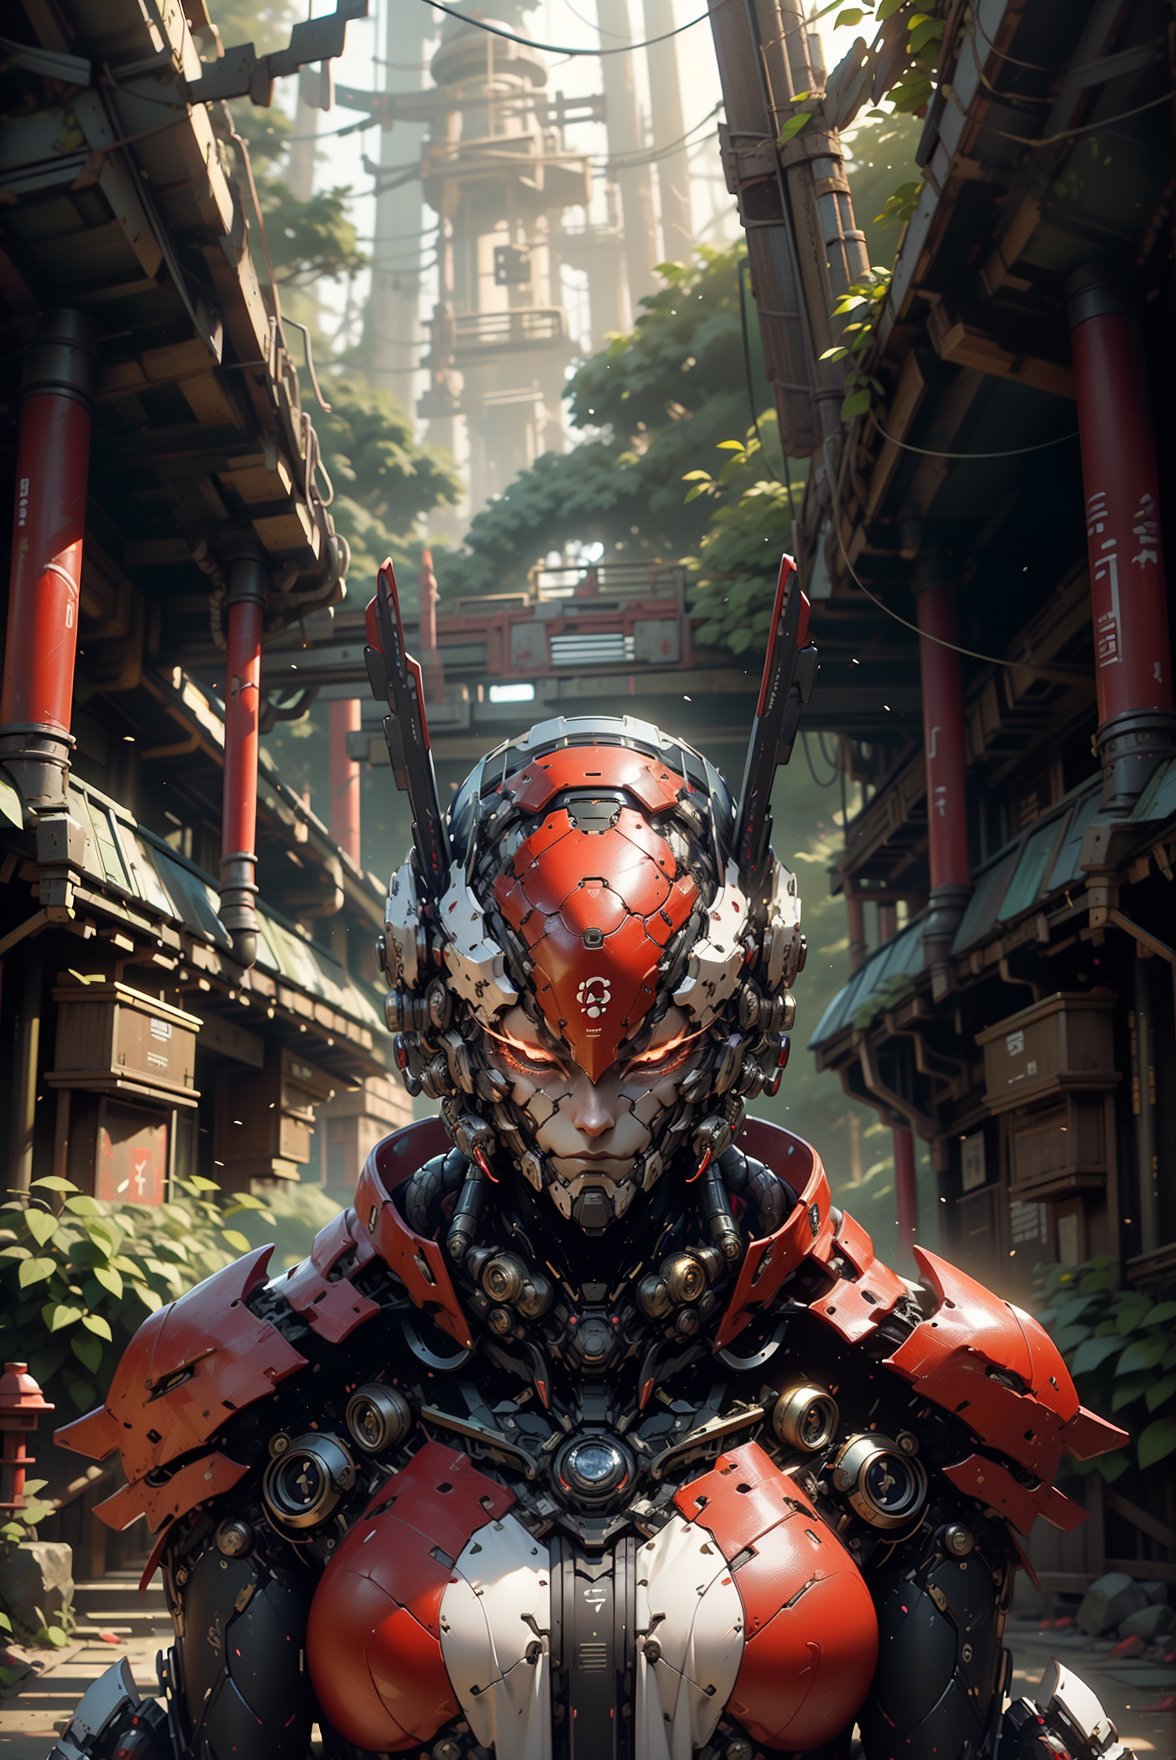 highres,close-up, ((pov   front )),in a Japanese temple background, (ninja bot),,heavy armour , cinematic poster ,  a 1 red,battle bot, mecha mask  ,Ultra HD, ultra detailed,  ,,   mecha bot, (( red bot )),mecha helmet,michancal armour, looking at the viewer,,outdoors, ((in a Forest temple )),lush forest,((high-tech building background )),     (sci-fi),   .  highly detaild SciFi temple background ,   outdoor temple sense with  , ruins,  , sparkling light,  , beautiful background,beautiful Japanese temple 